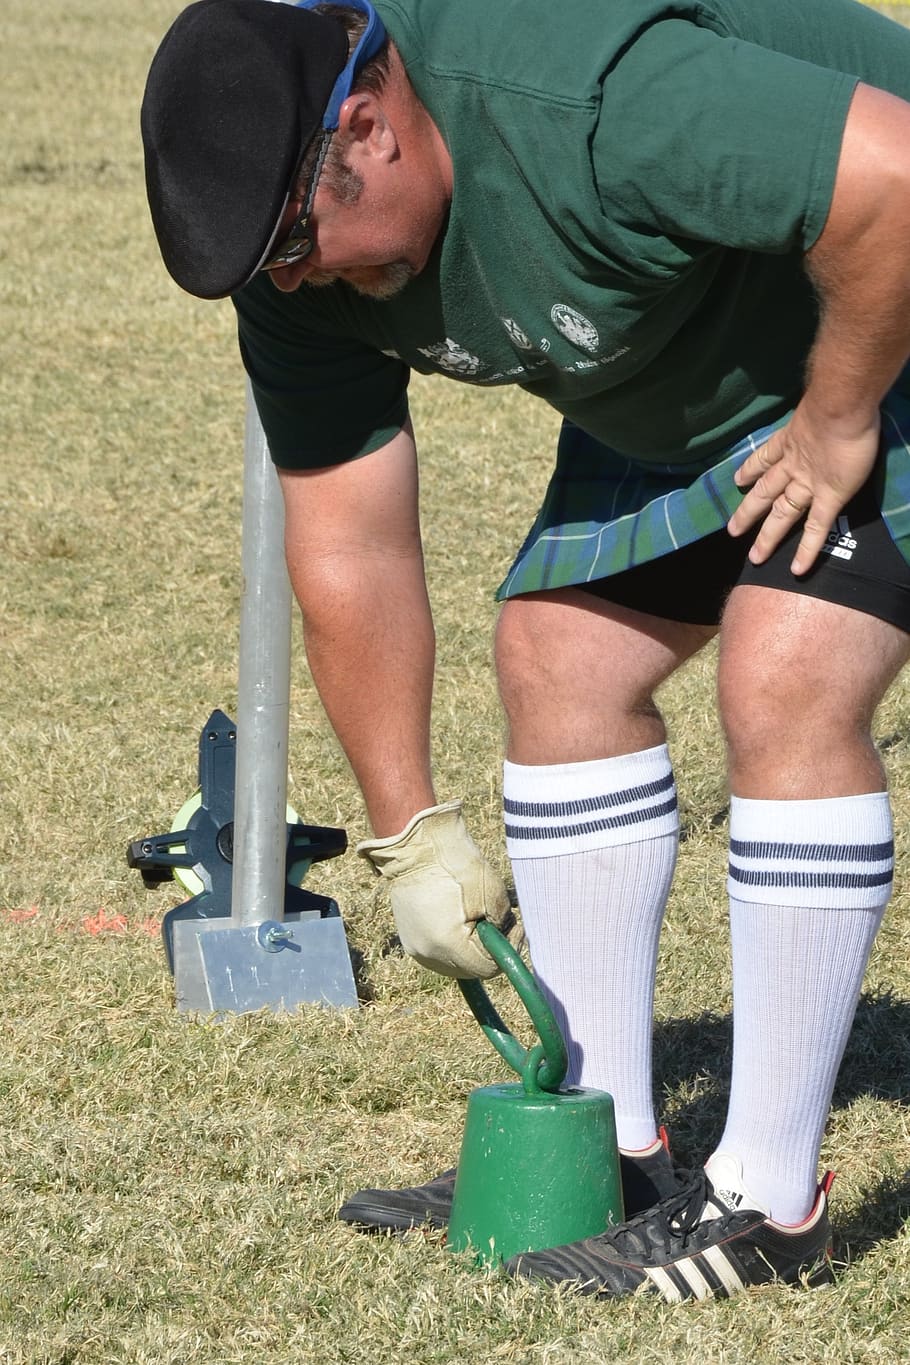 celtic games, highland games, scottish games, weight toss, real people, men, grass, leisure activity, day, casual clothing